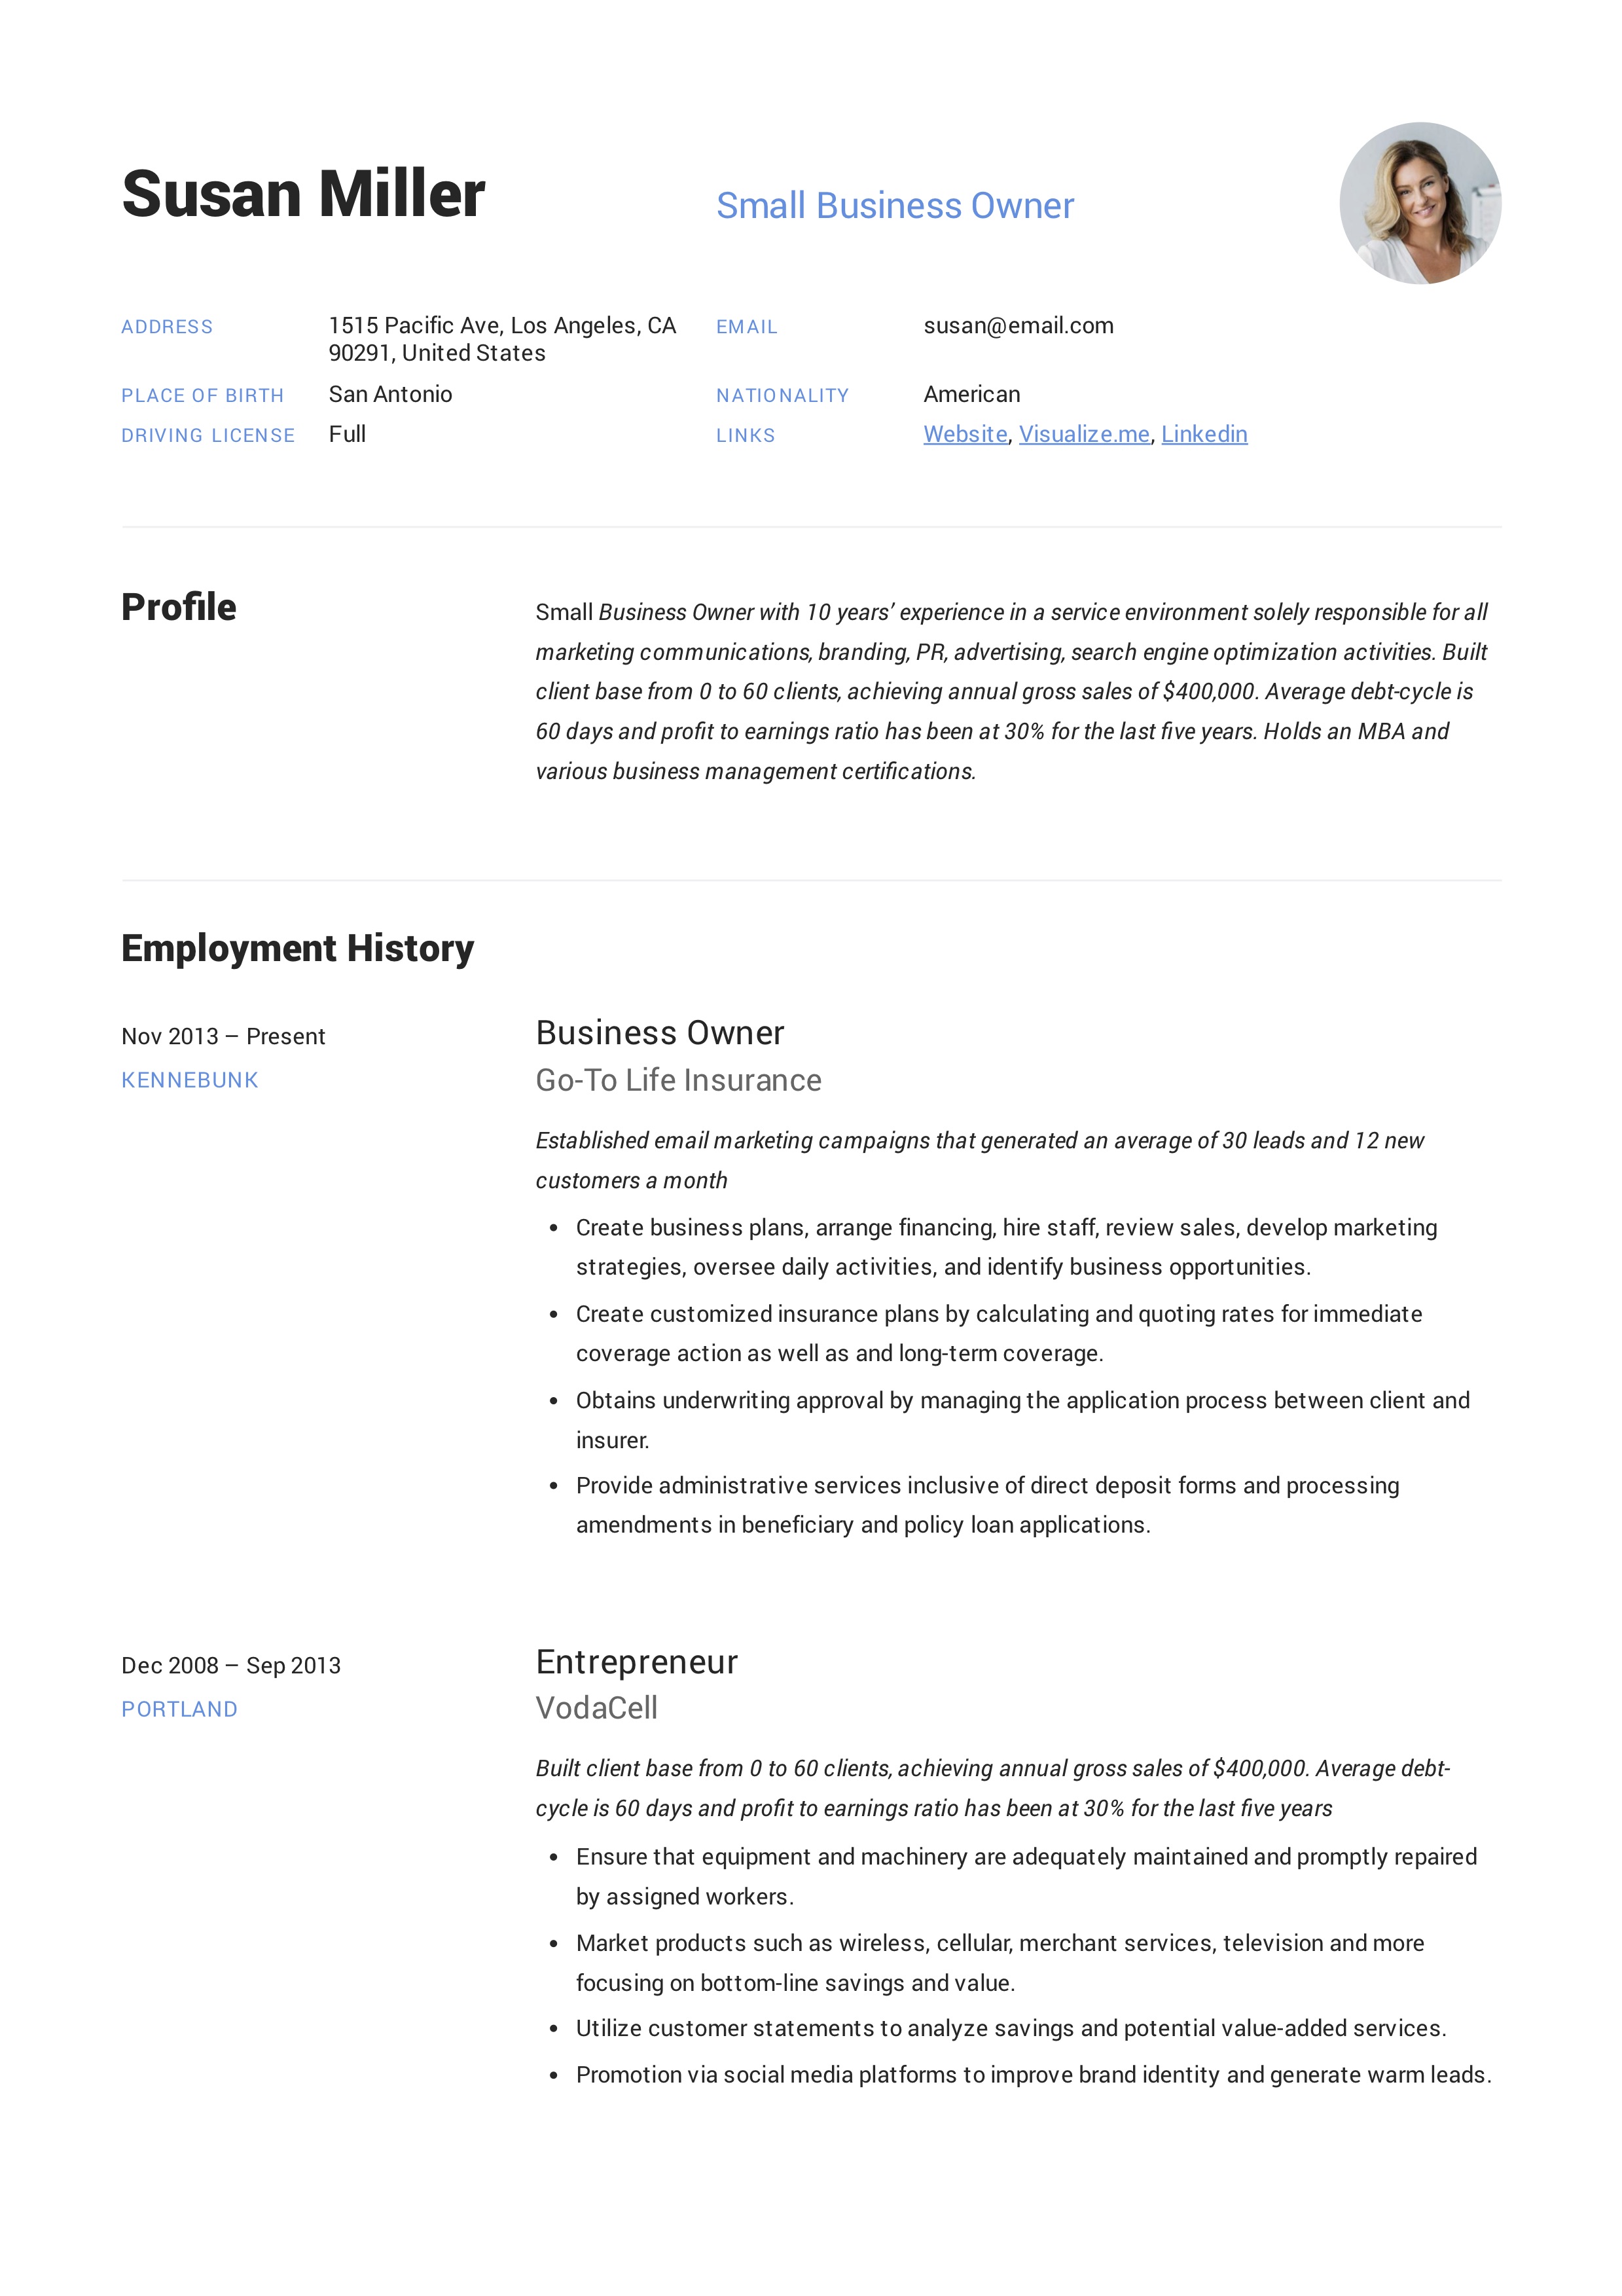 Small Business Owner Resume Guide  +12 Examples  PDF  2019